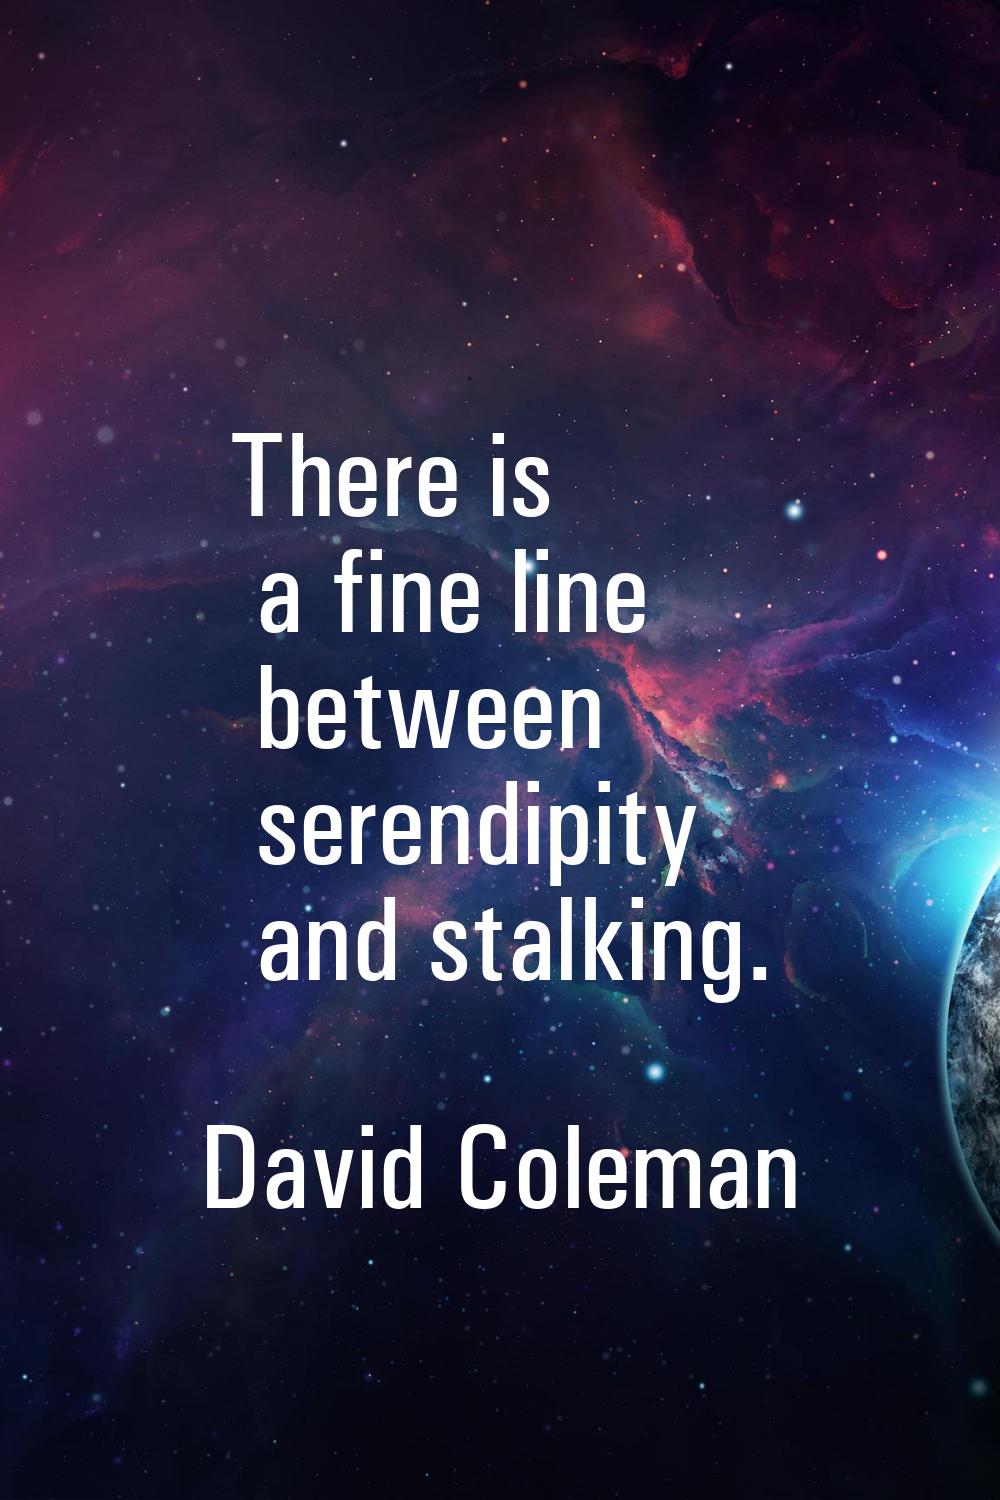 There is a fine line between serendipity and stalking.